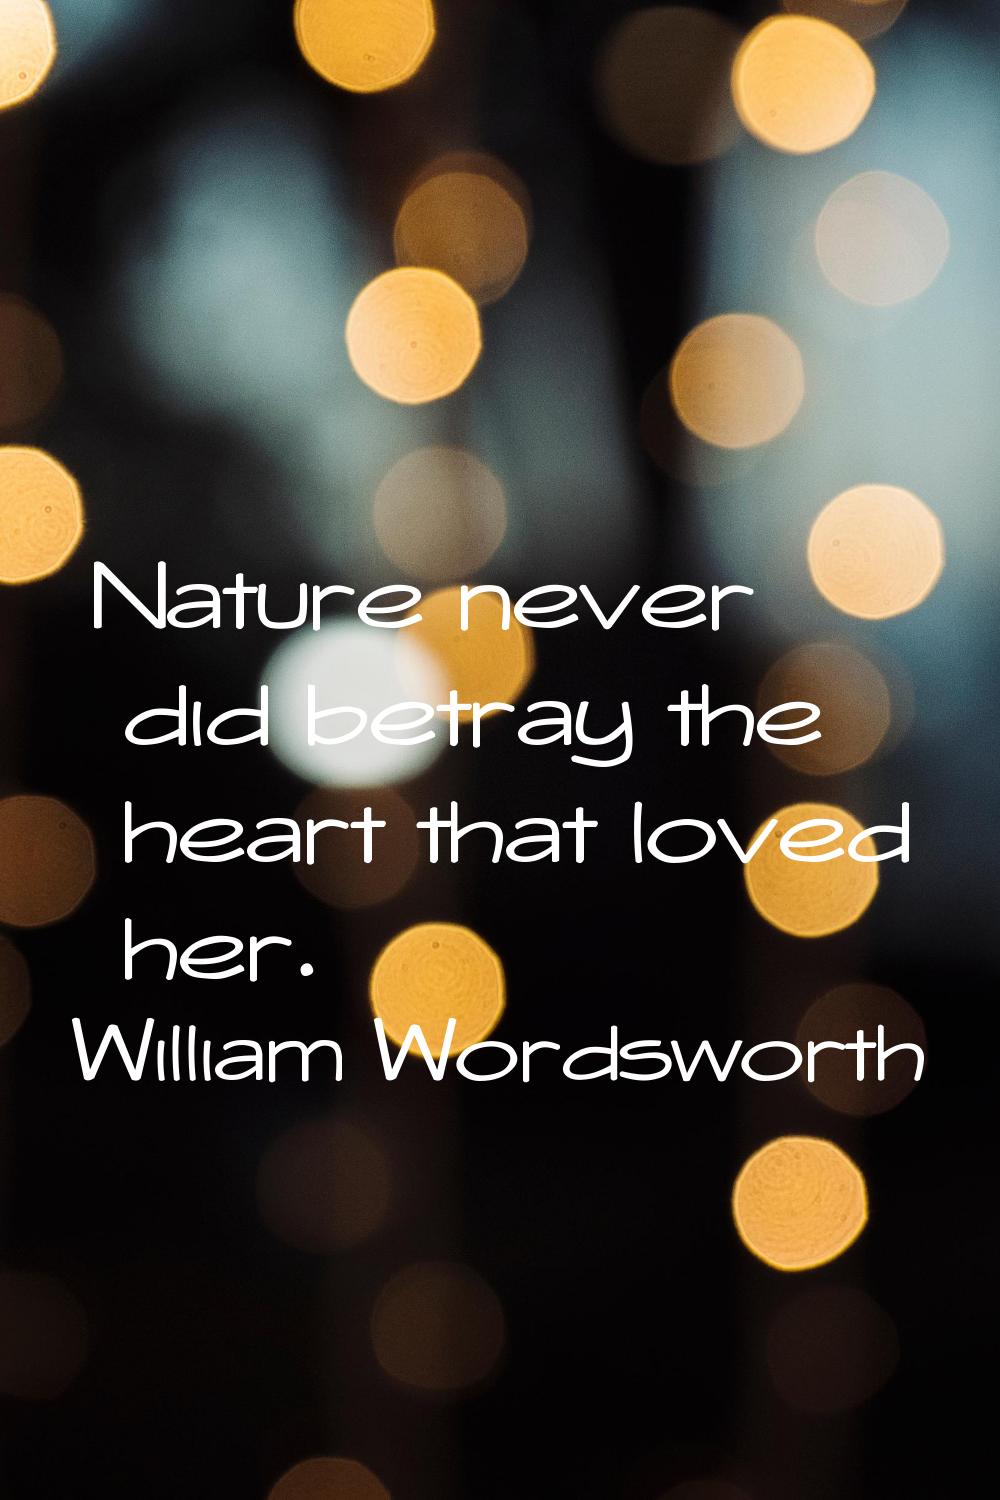 Nature never did betray the heart that loved her.